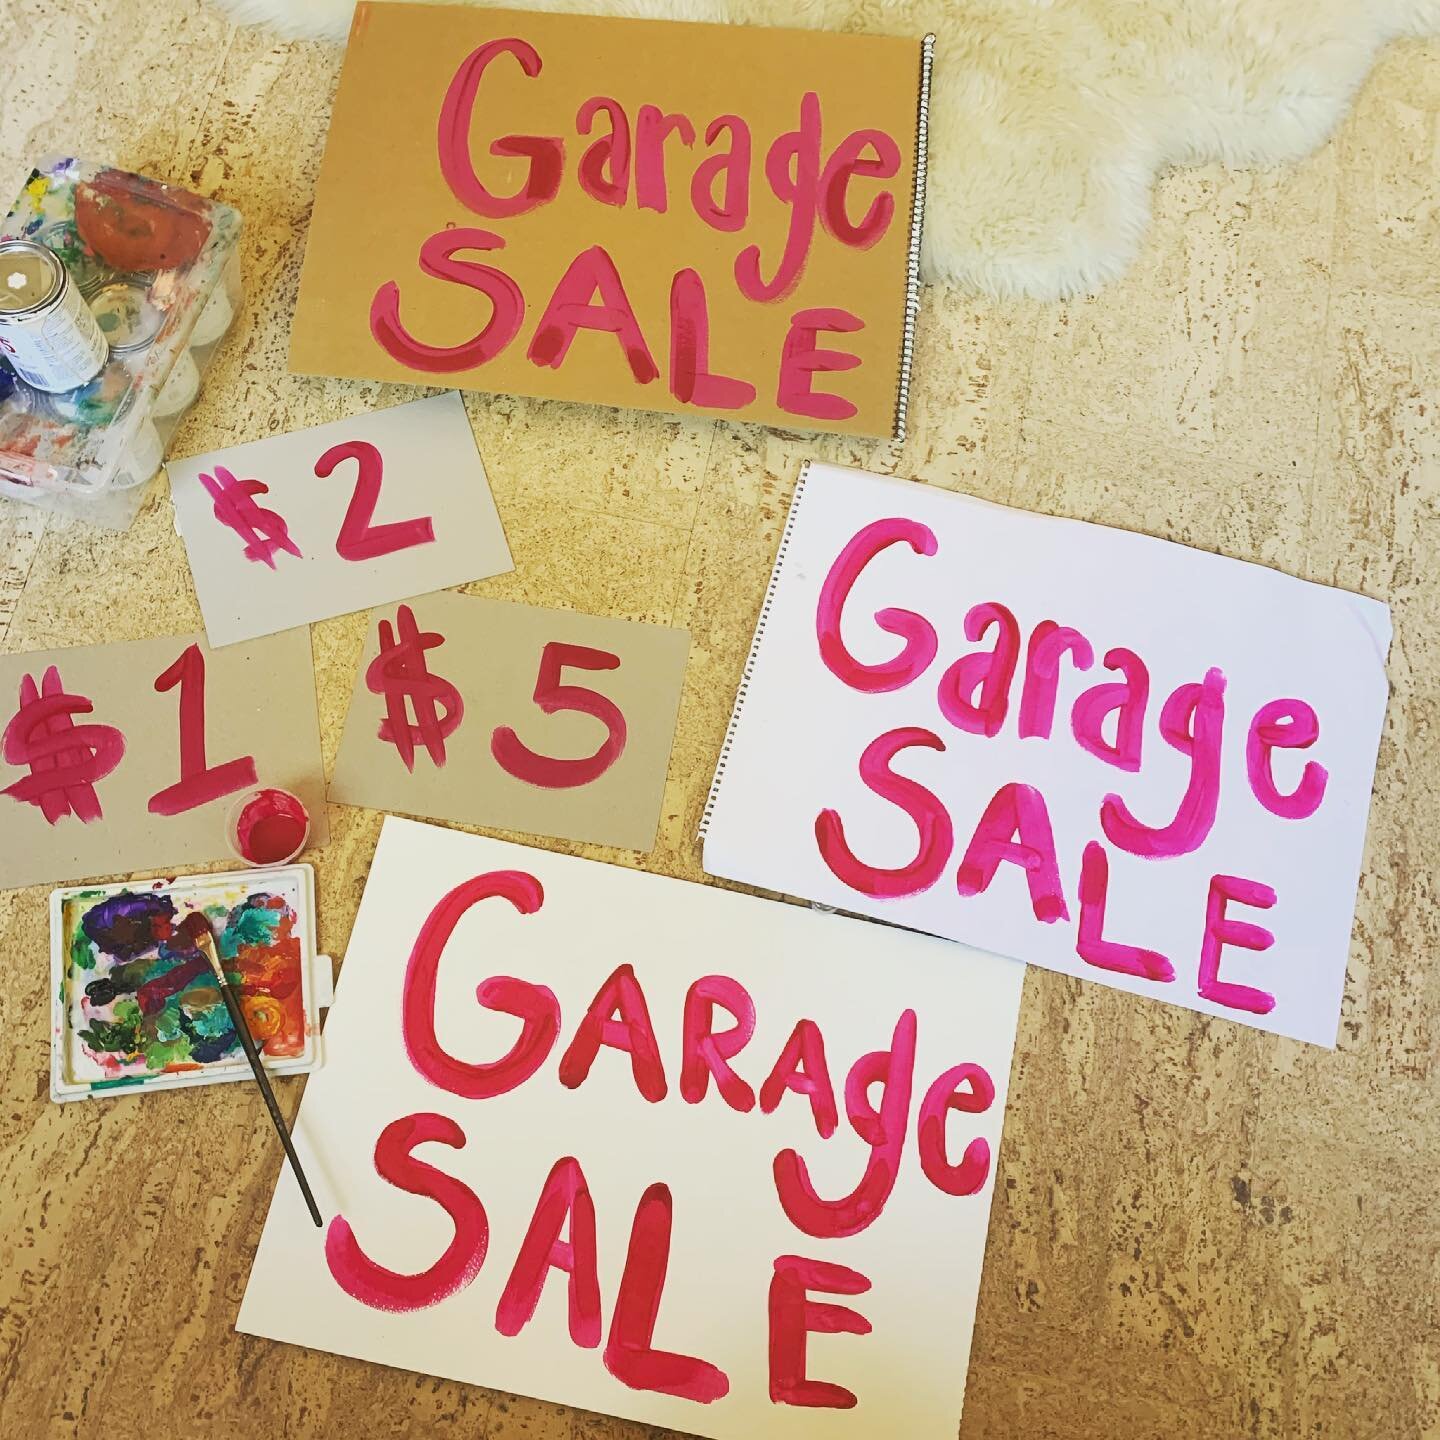 Feels good to release the old!! We are having a garage sale tomorrow SAT 7-12pm with our lovely neighbors @heidigrandinetti &amp; @blastslo! Local friends come shop or sell some of your old!! Cross streets Pismo St &amp; Jhonson Ave (you&rsquo;ll see